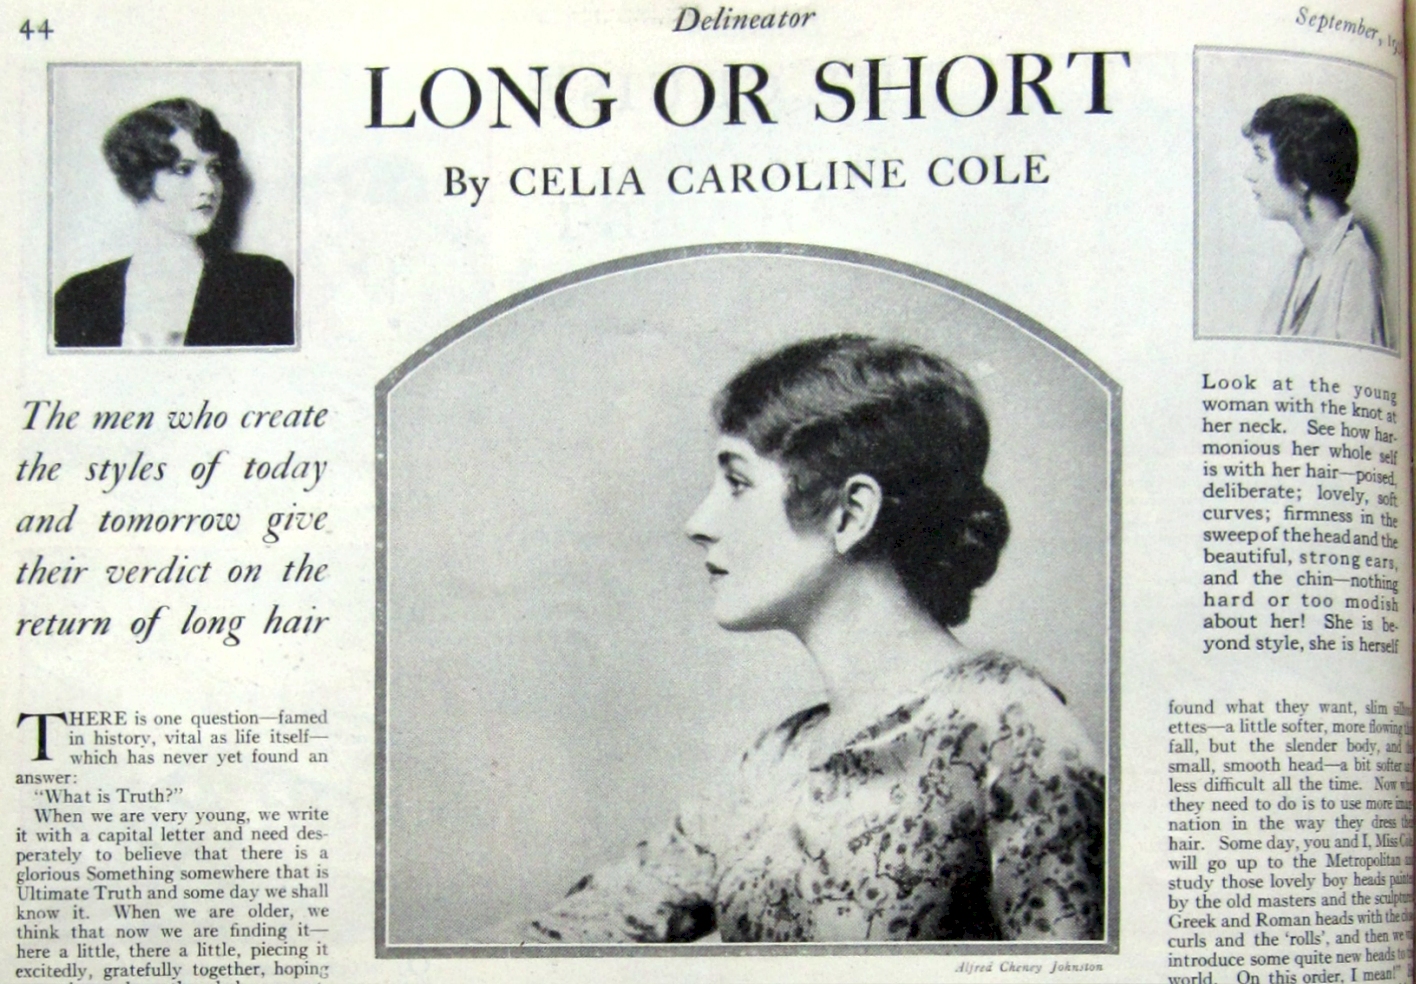 "The men who create the styles of today and tomorrow give theri verdict on the return of long hair." Delineator, September, 1928.